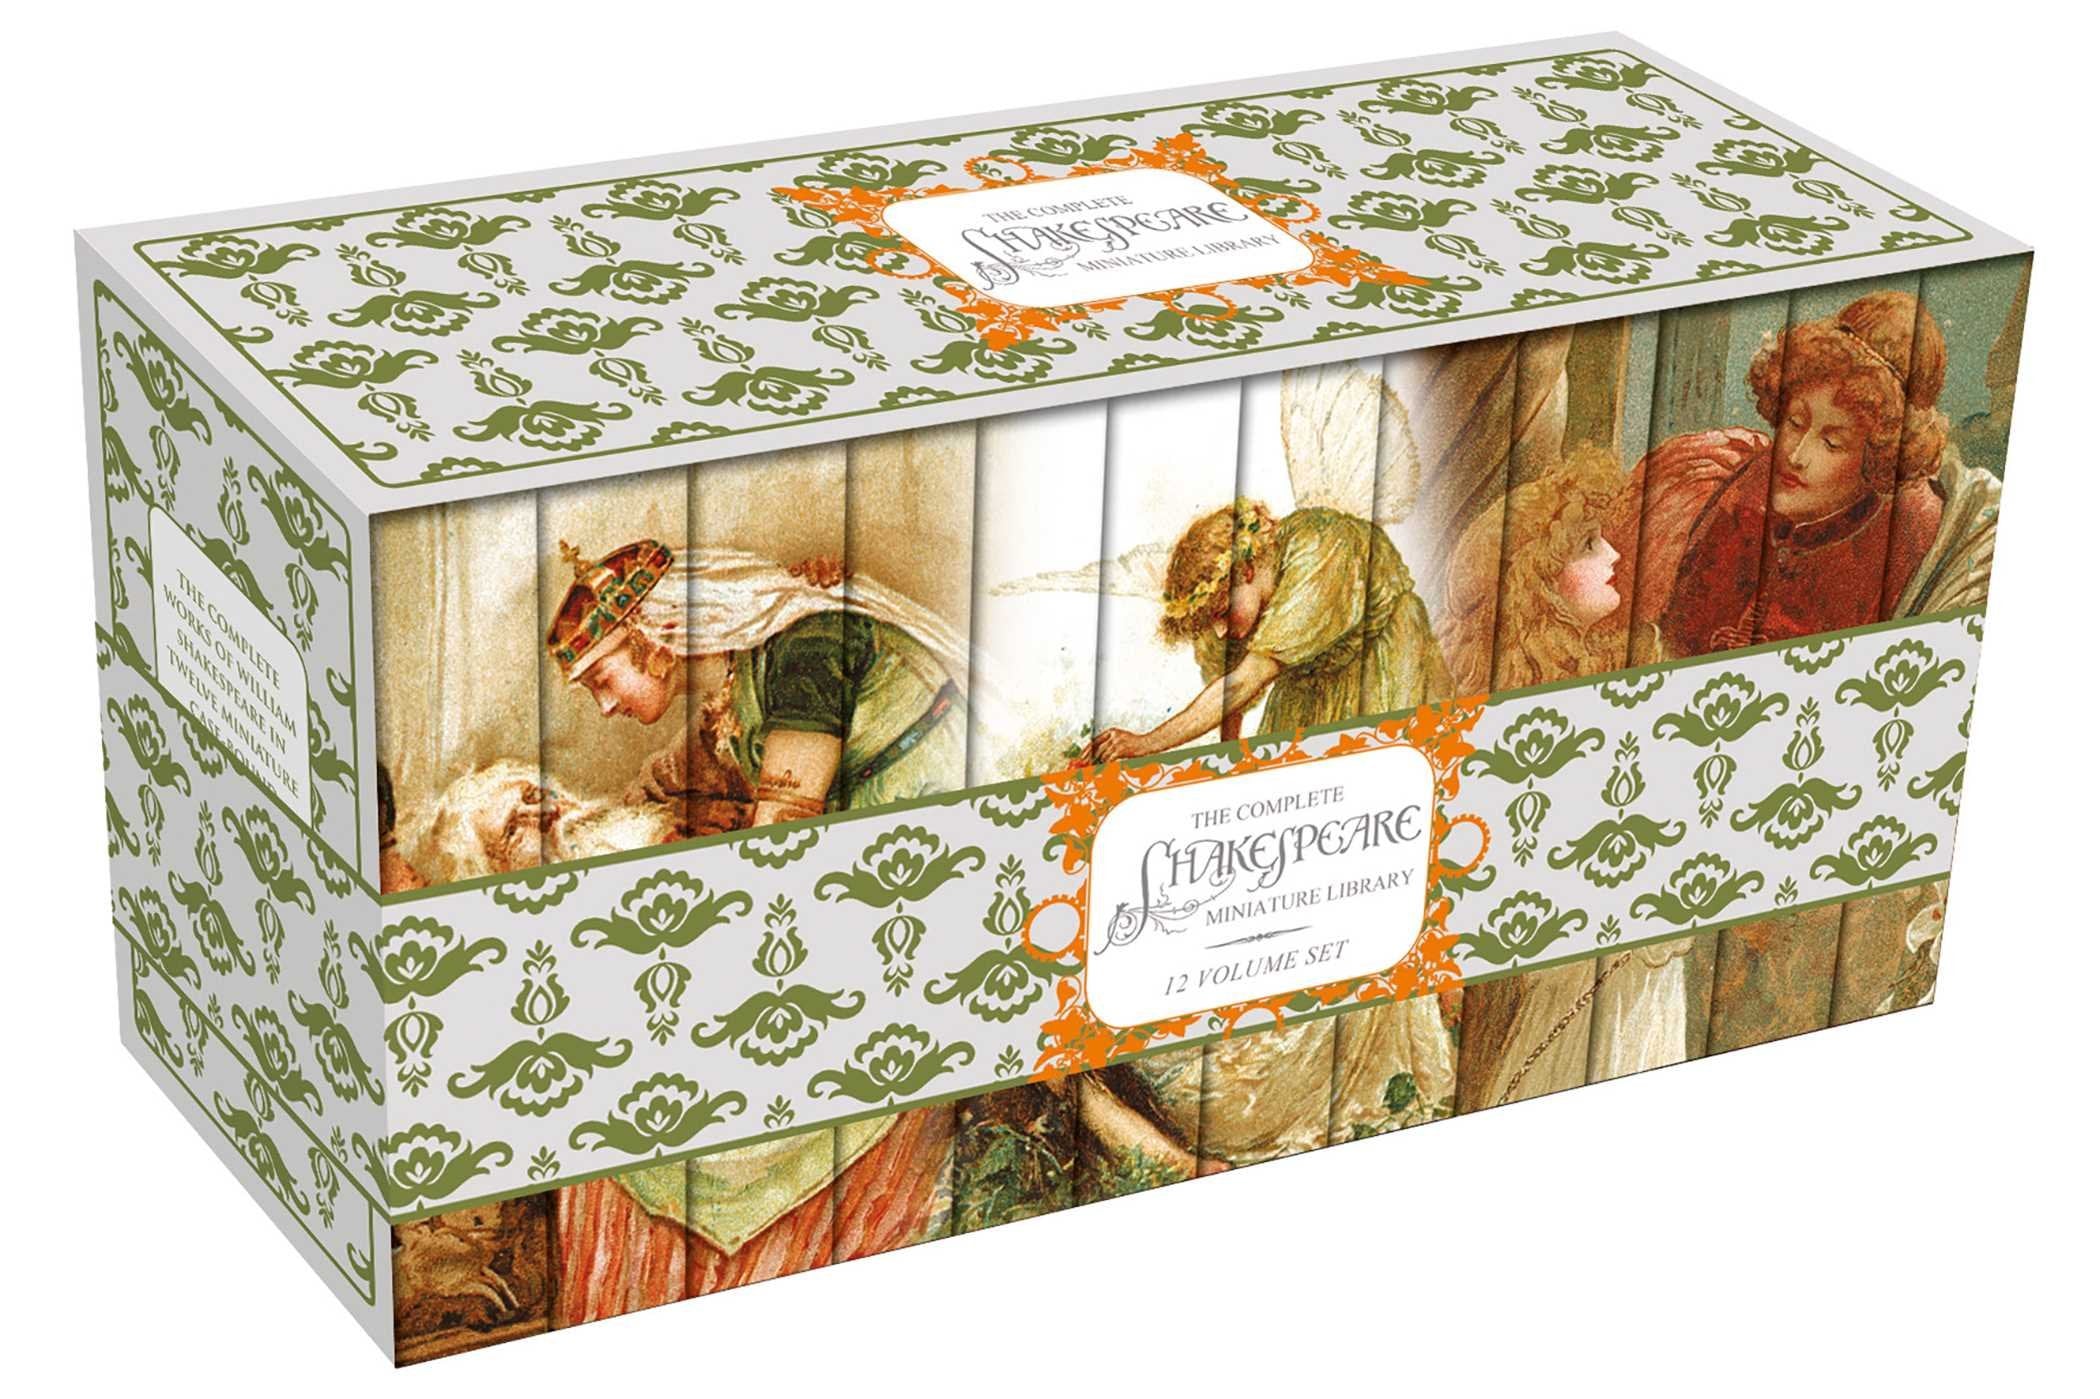 The Complete Shakespeare Miniature Library Box Set - The Comic Warehouse